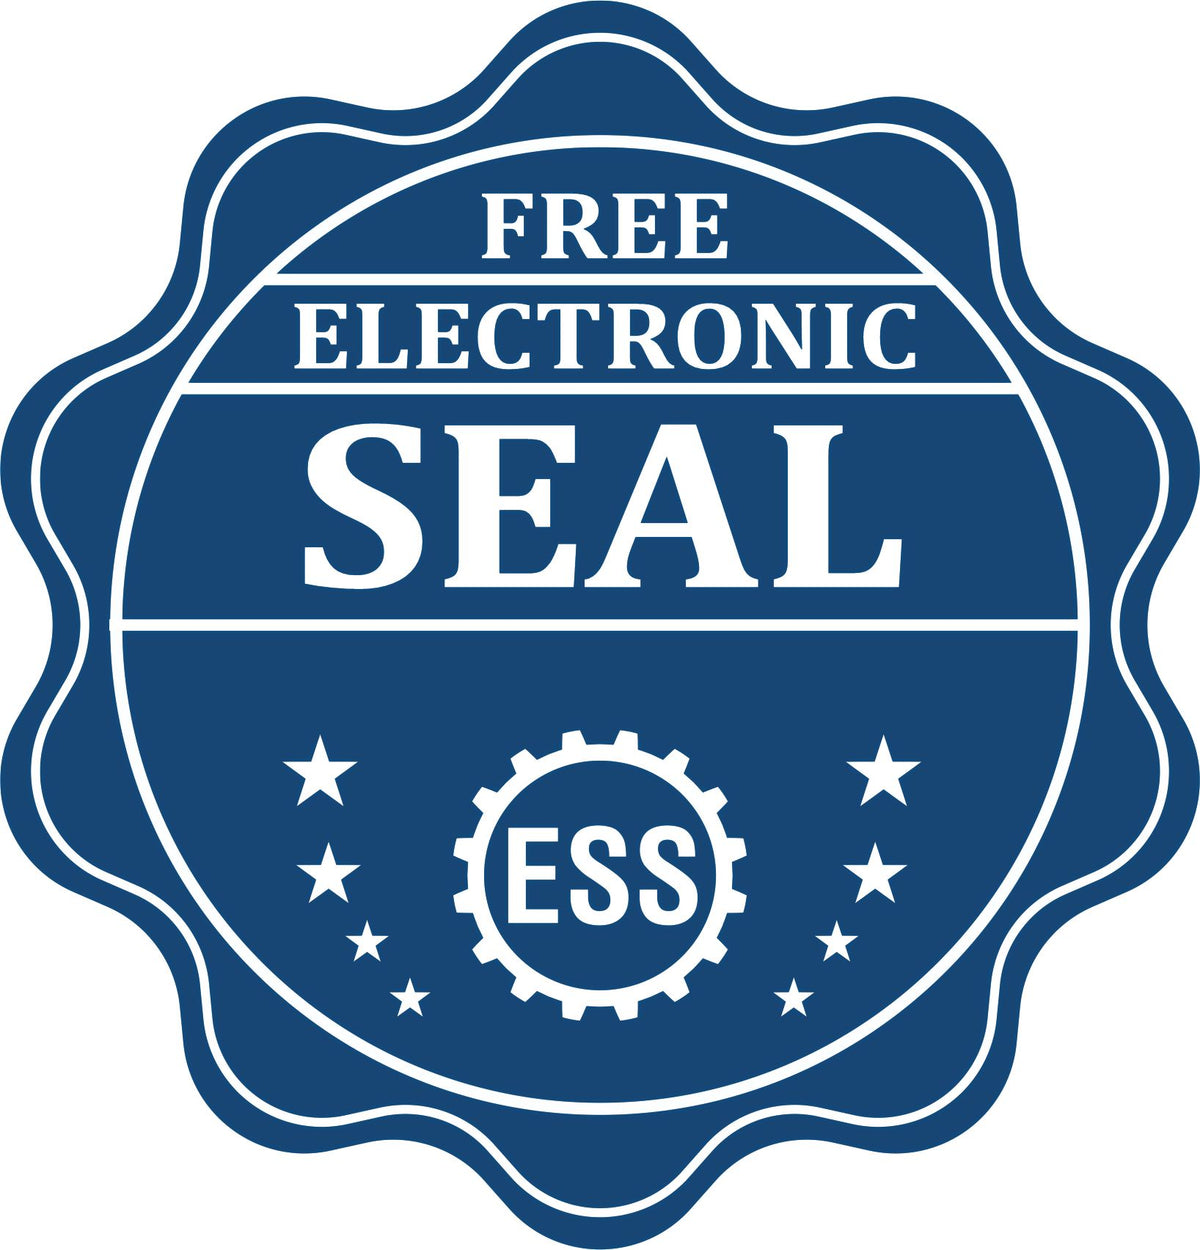 A badge showing a free electronic seal for the State of Missouri Extended Long Reach Engineer Seal with stars and the ESS gear on the emblem.